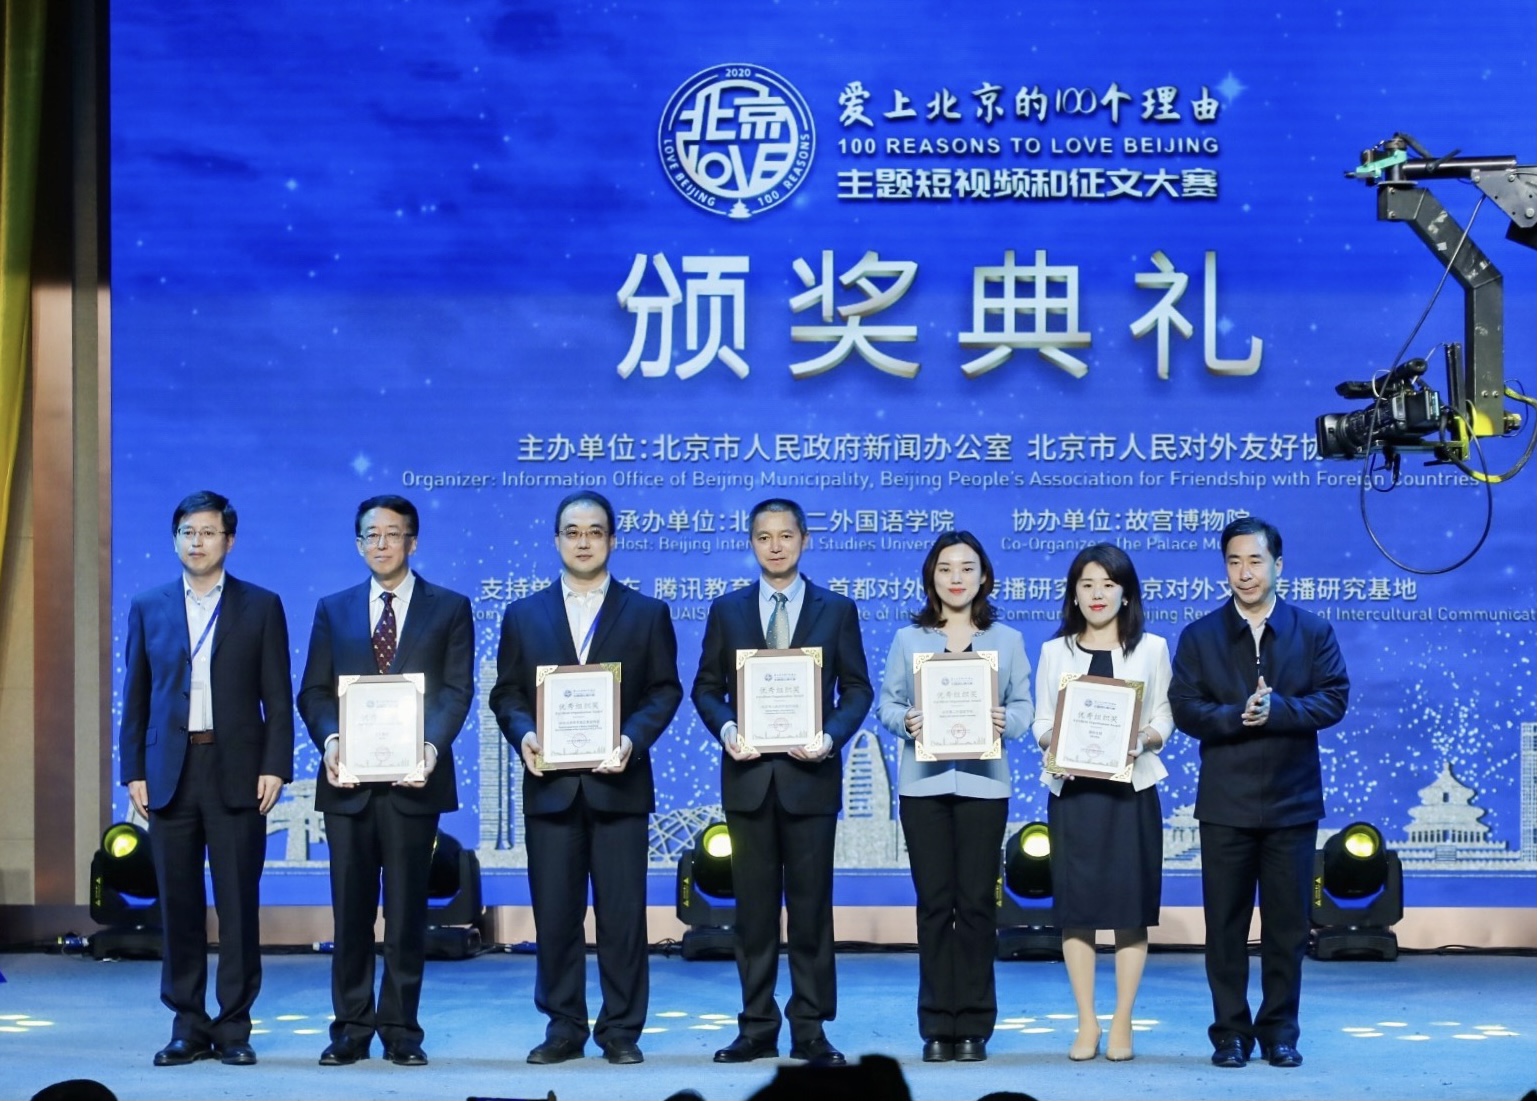 Representatives from JD.com, China Radio International, Beijing International Studies University, Pubilicity Department of Beijing's Dongcheng District, Beijing People's Association for Friendship with Foreign Countries rewarded as "Excellent Organizations"